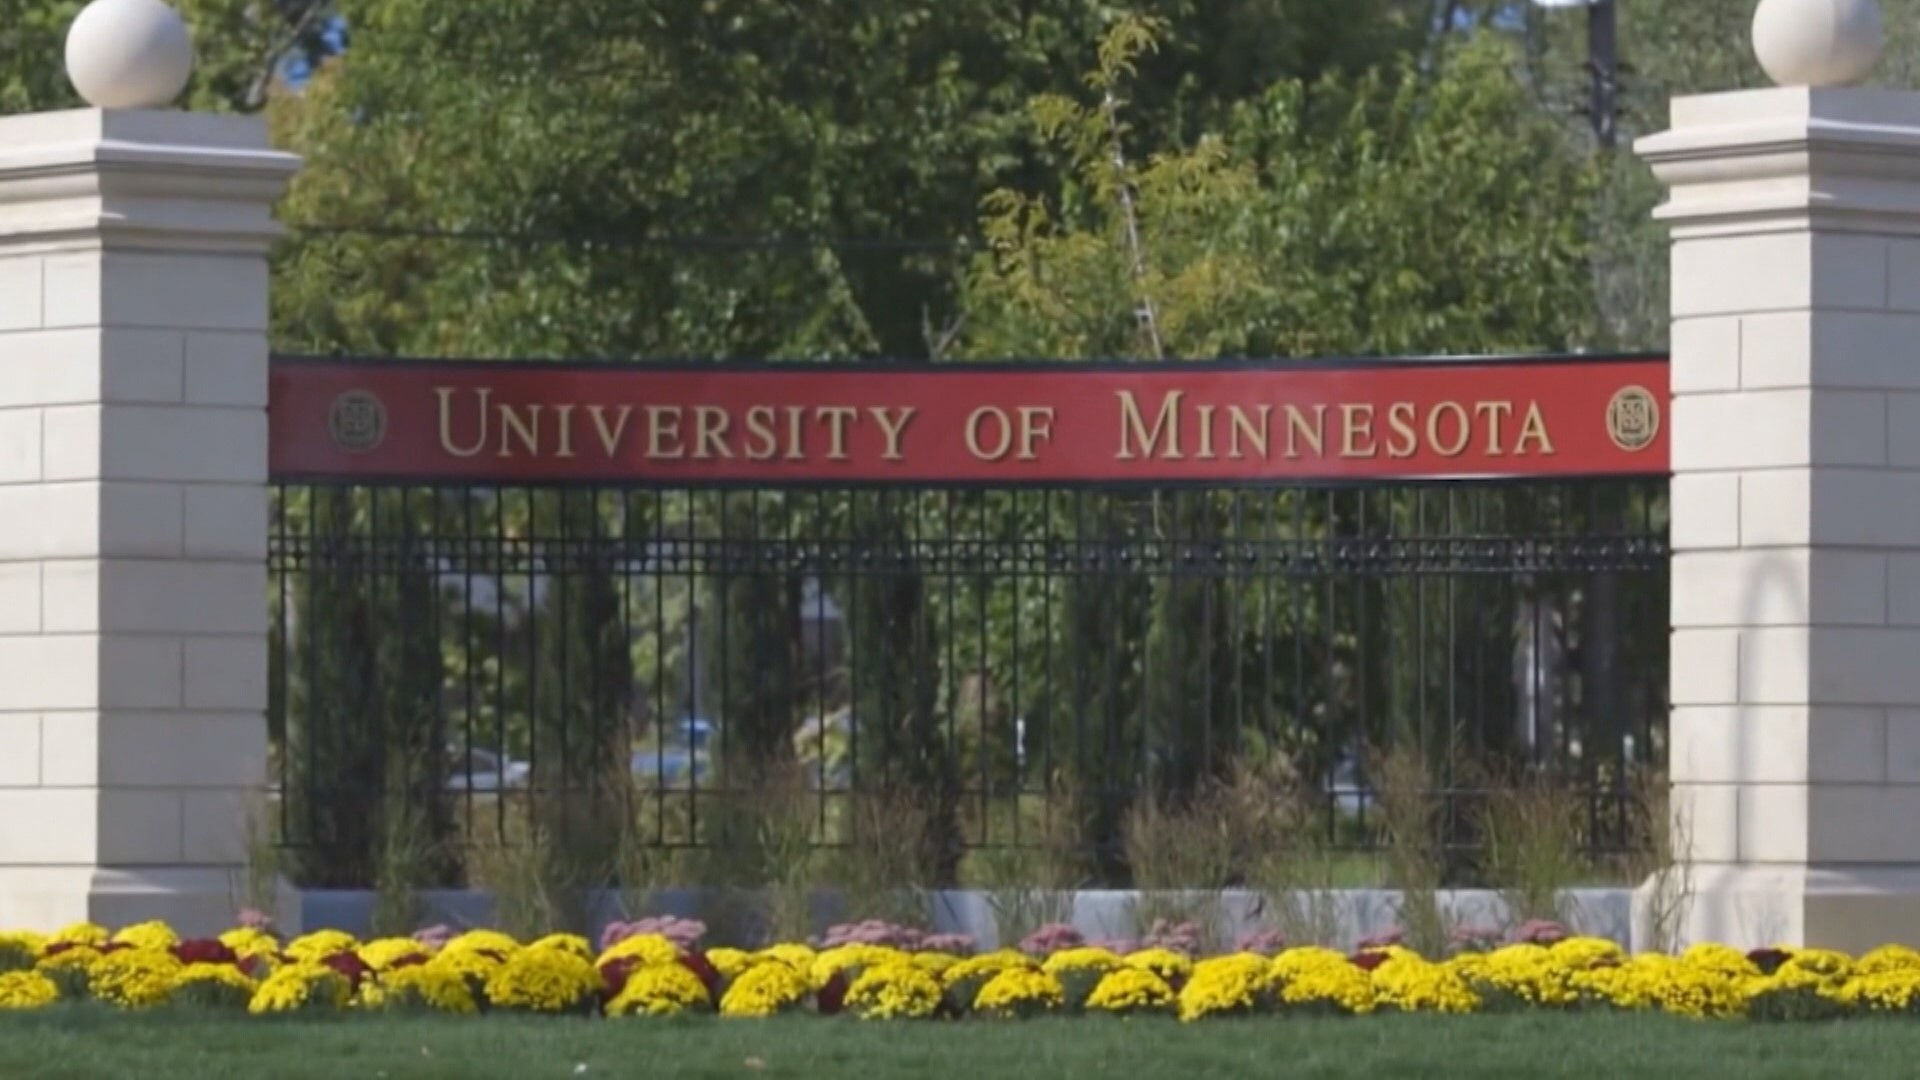 Rep. Gene Pelowski says the University of Minnesota is requesting another $48 million to cover the tuition shortfall and avoid any increases.